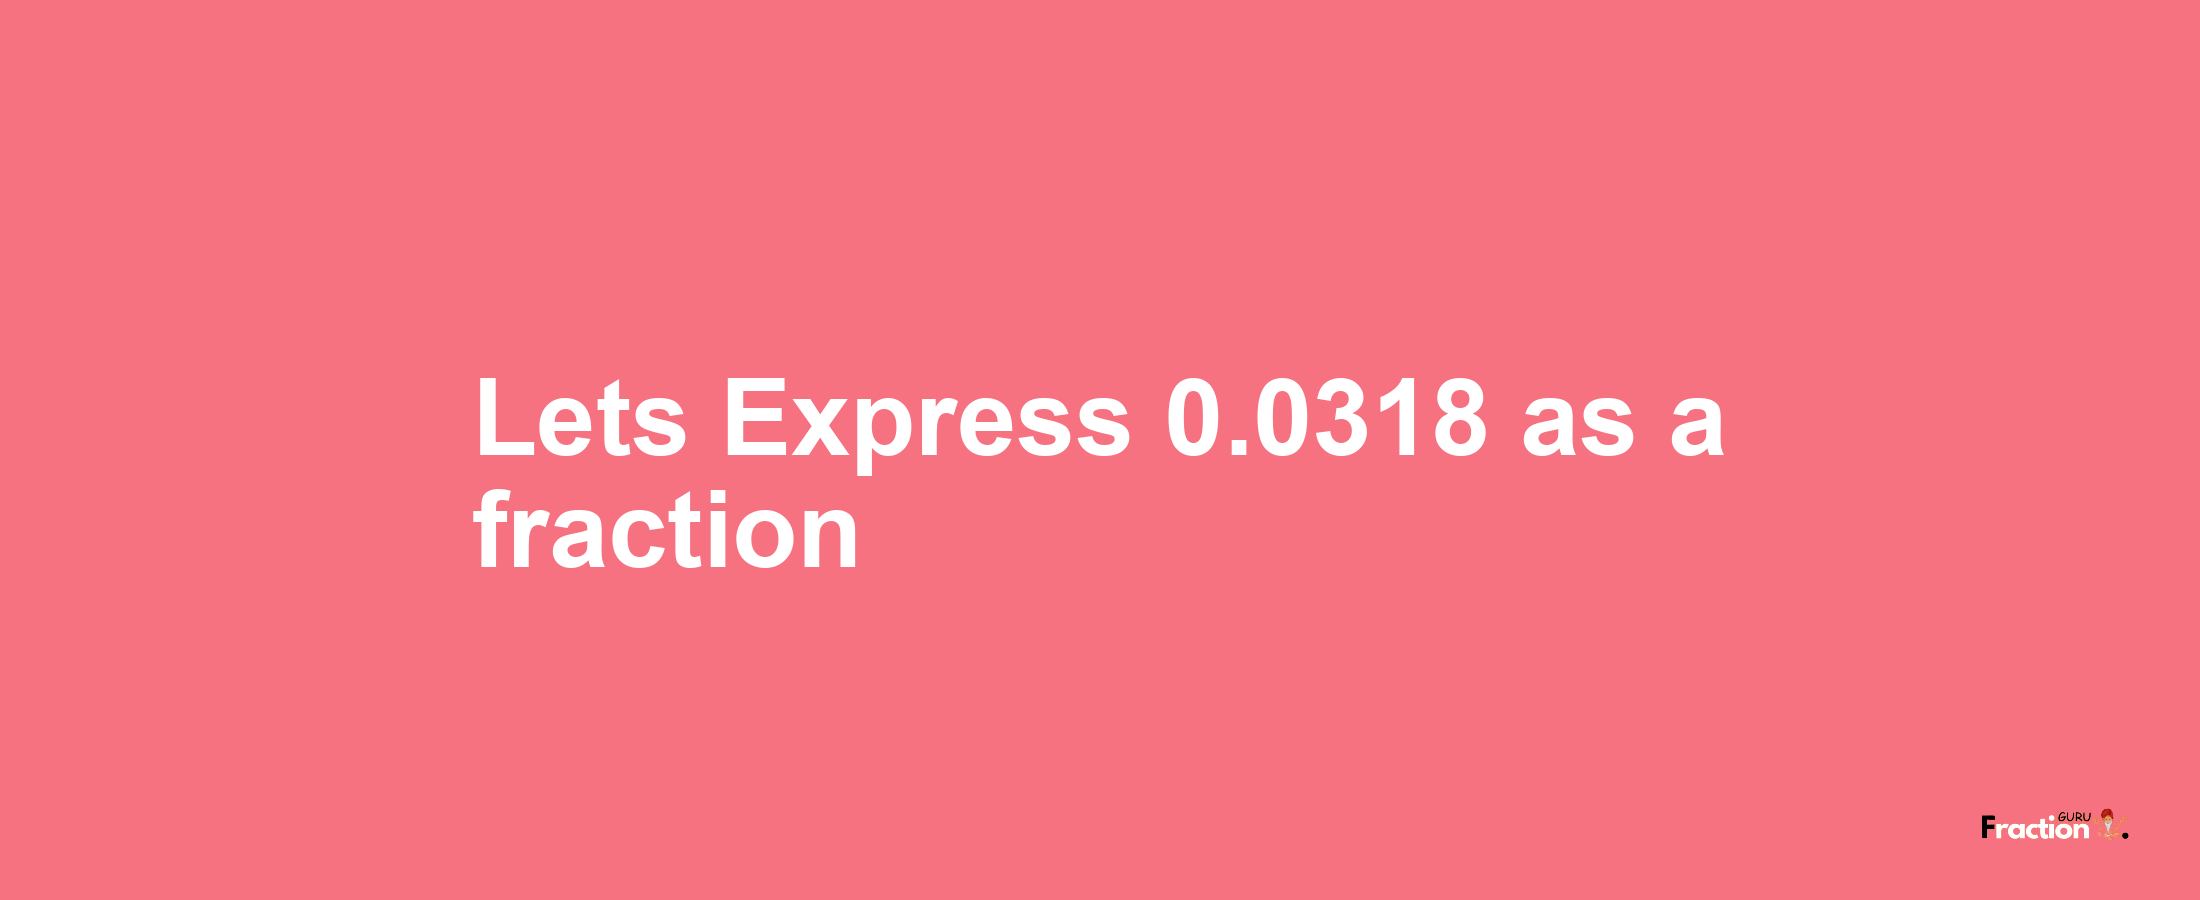 Lets Express 0.0318 as afraction